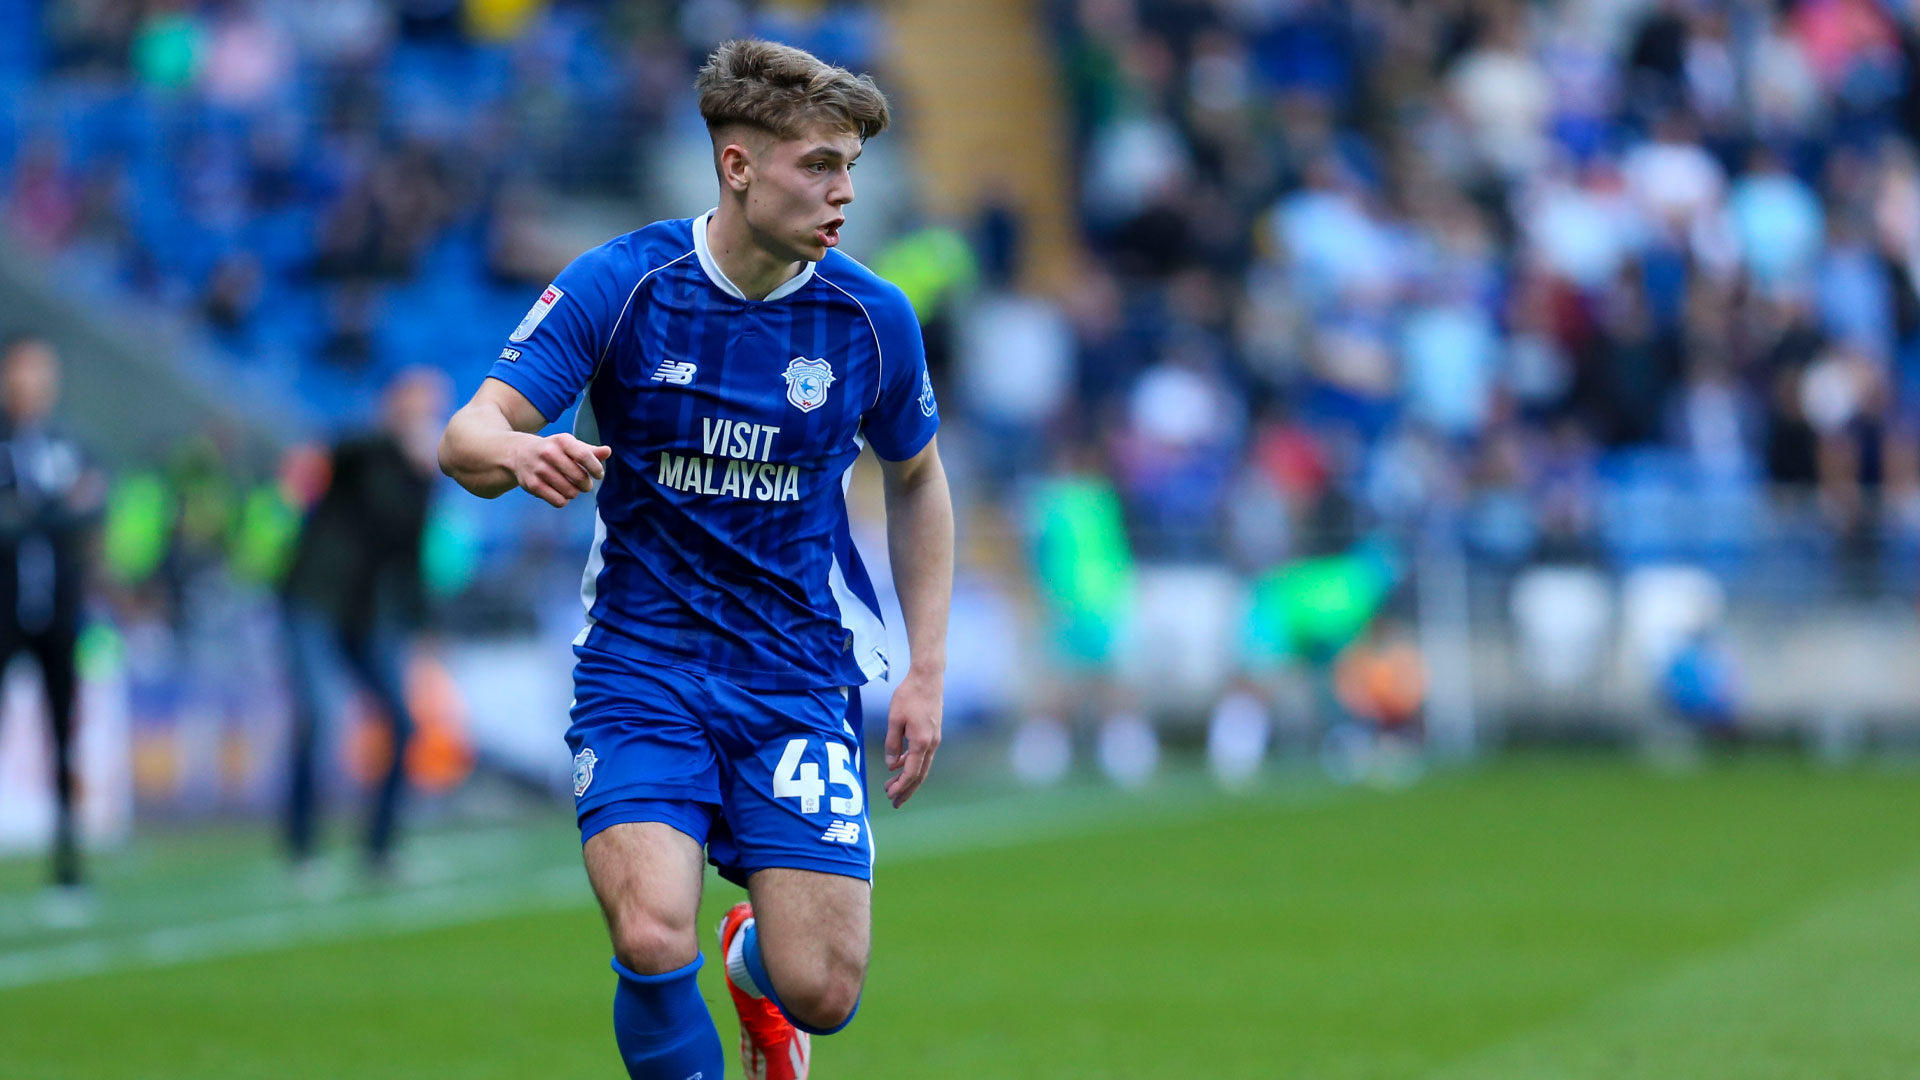 Cian Ashford in action for Cardiff City